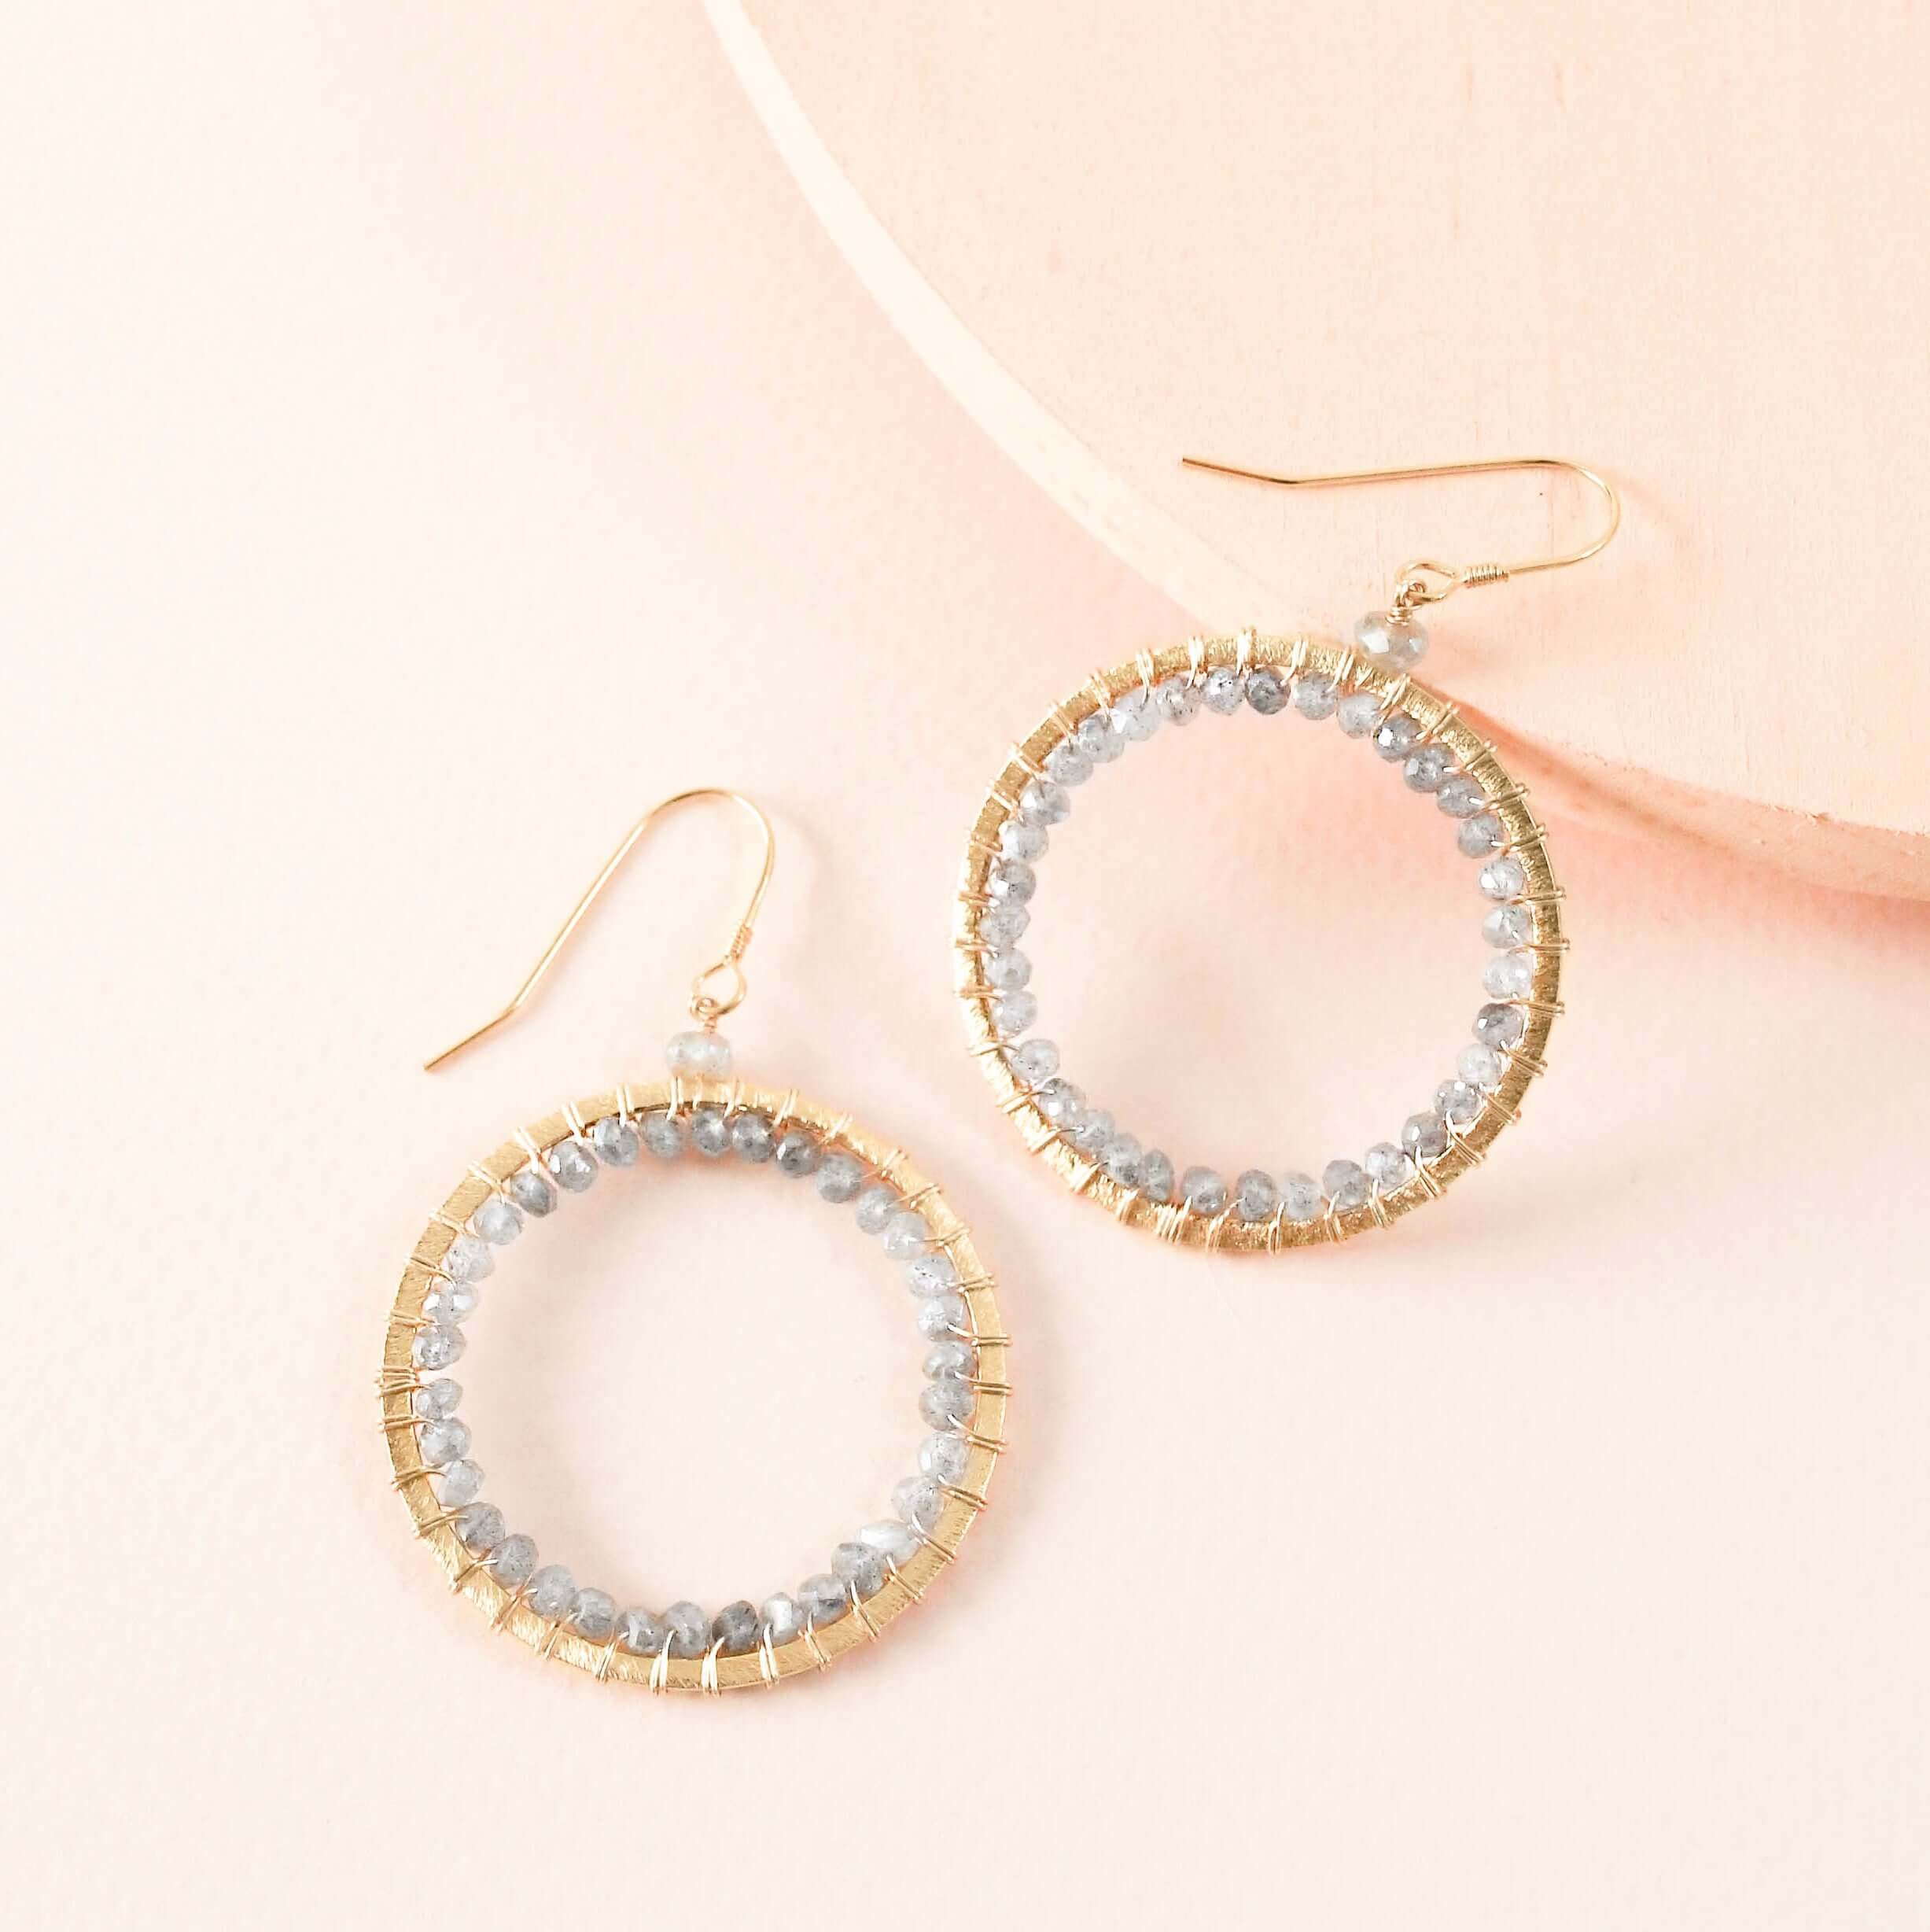 Luxurious Gold Earrings with authentic Labradorite Gemstones